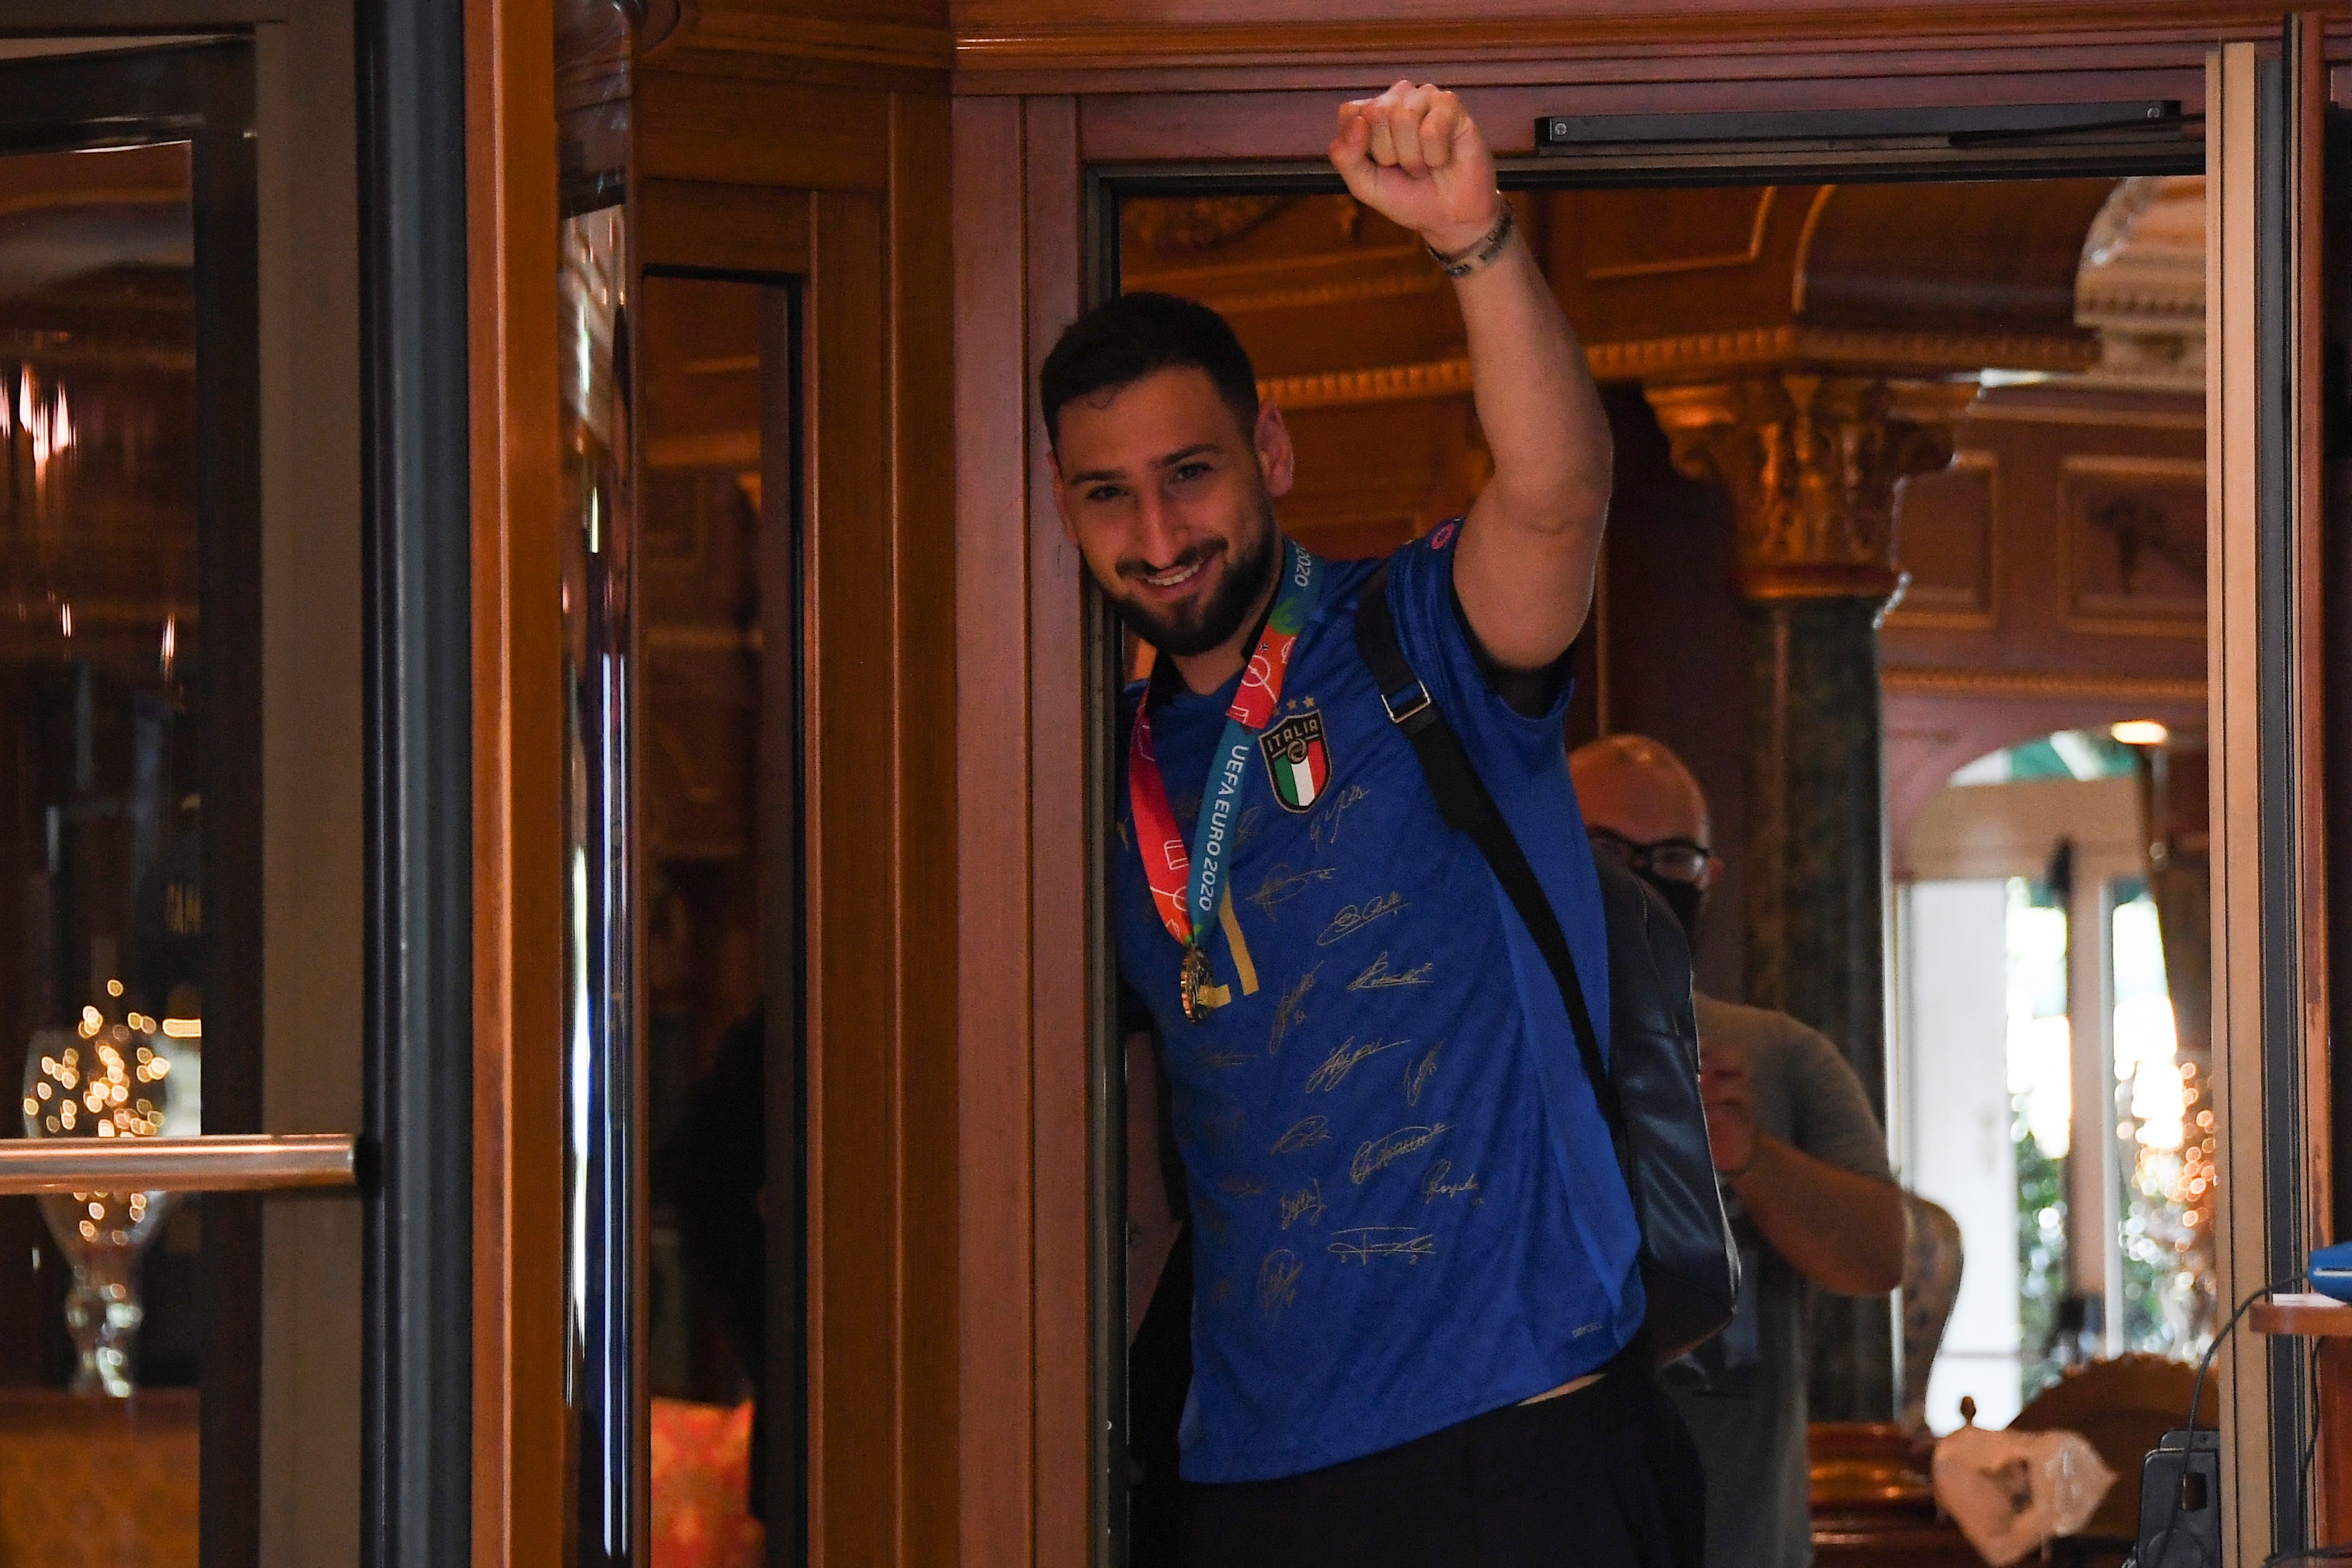 Euro 2020 - Italy's Gianluigi Donnarumma gestures as the team arrives at the Parco dei Principi hotel after winning the European Championship.(REUTERS)